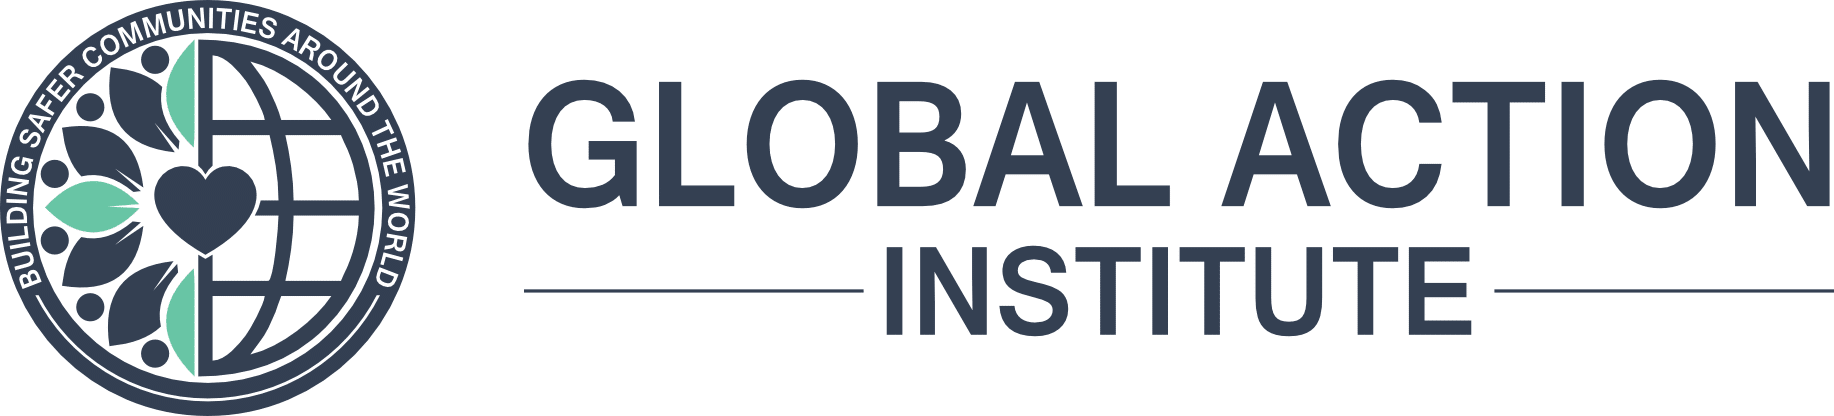 GLOBAL ACTION INSTITUTE